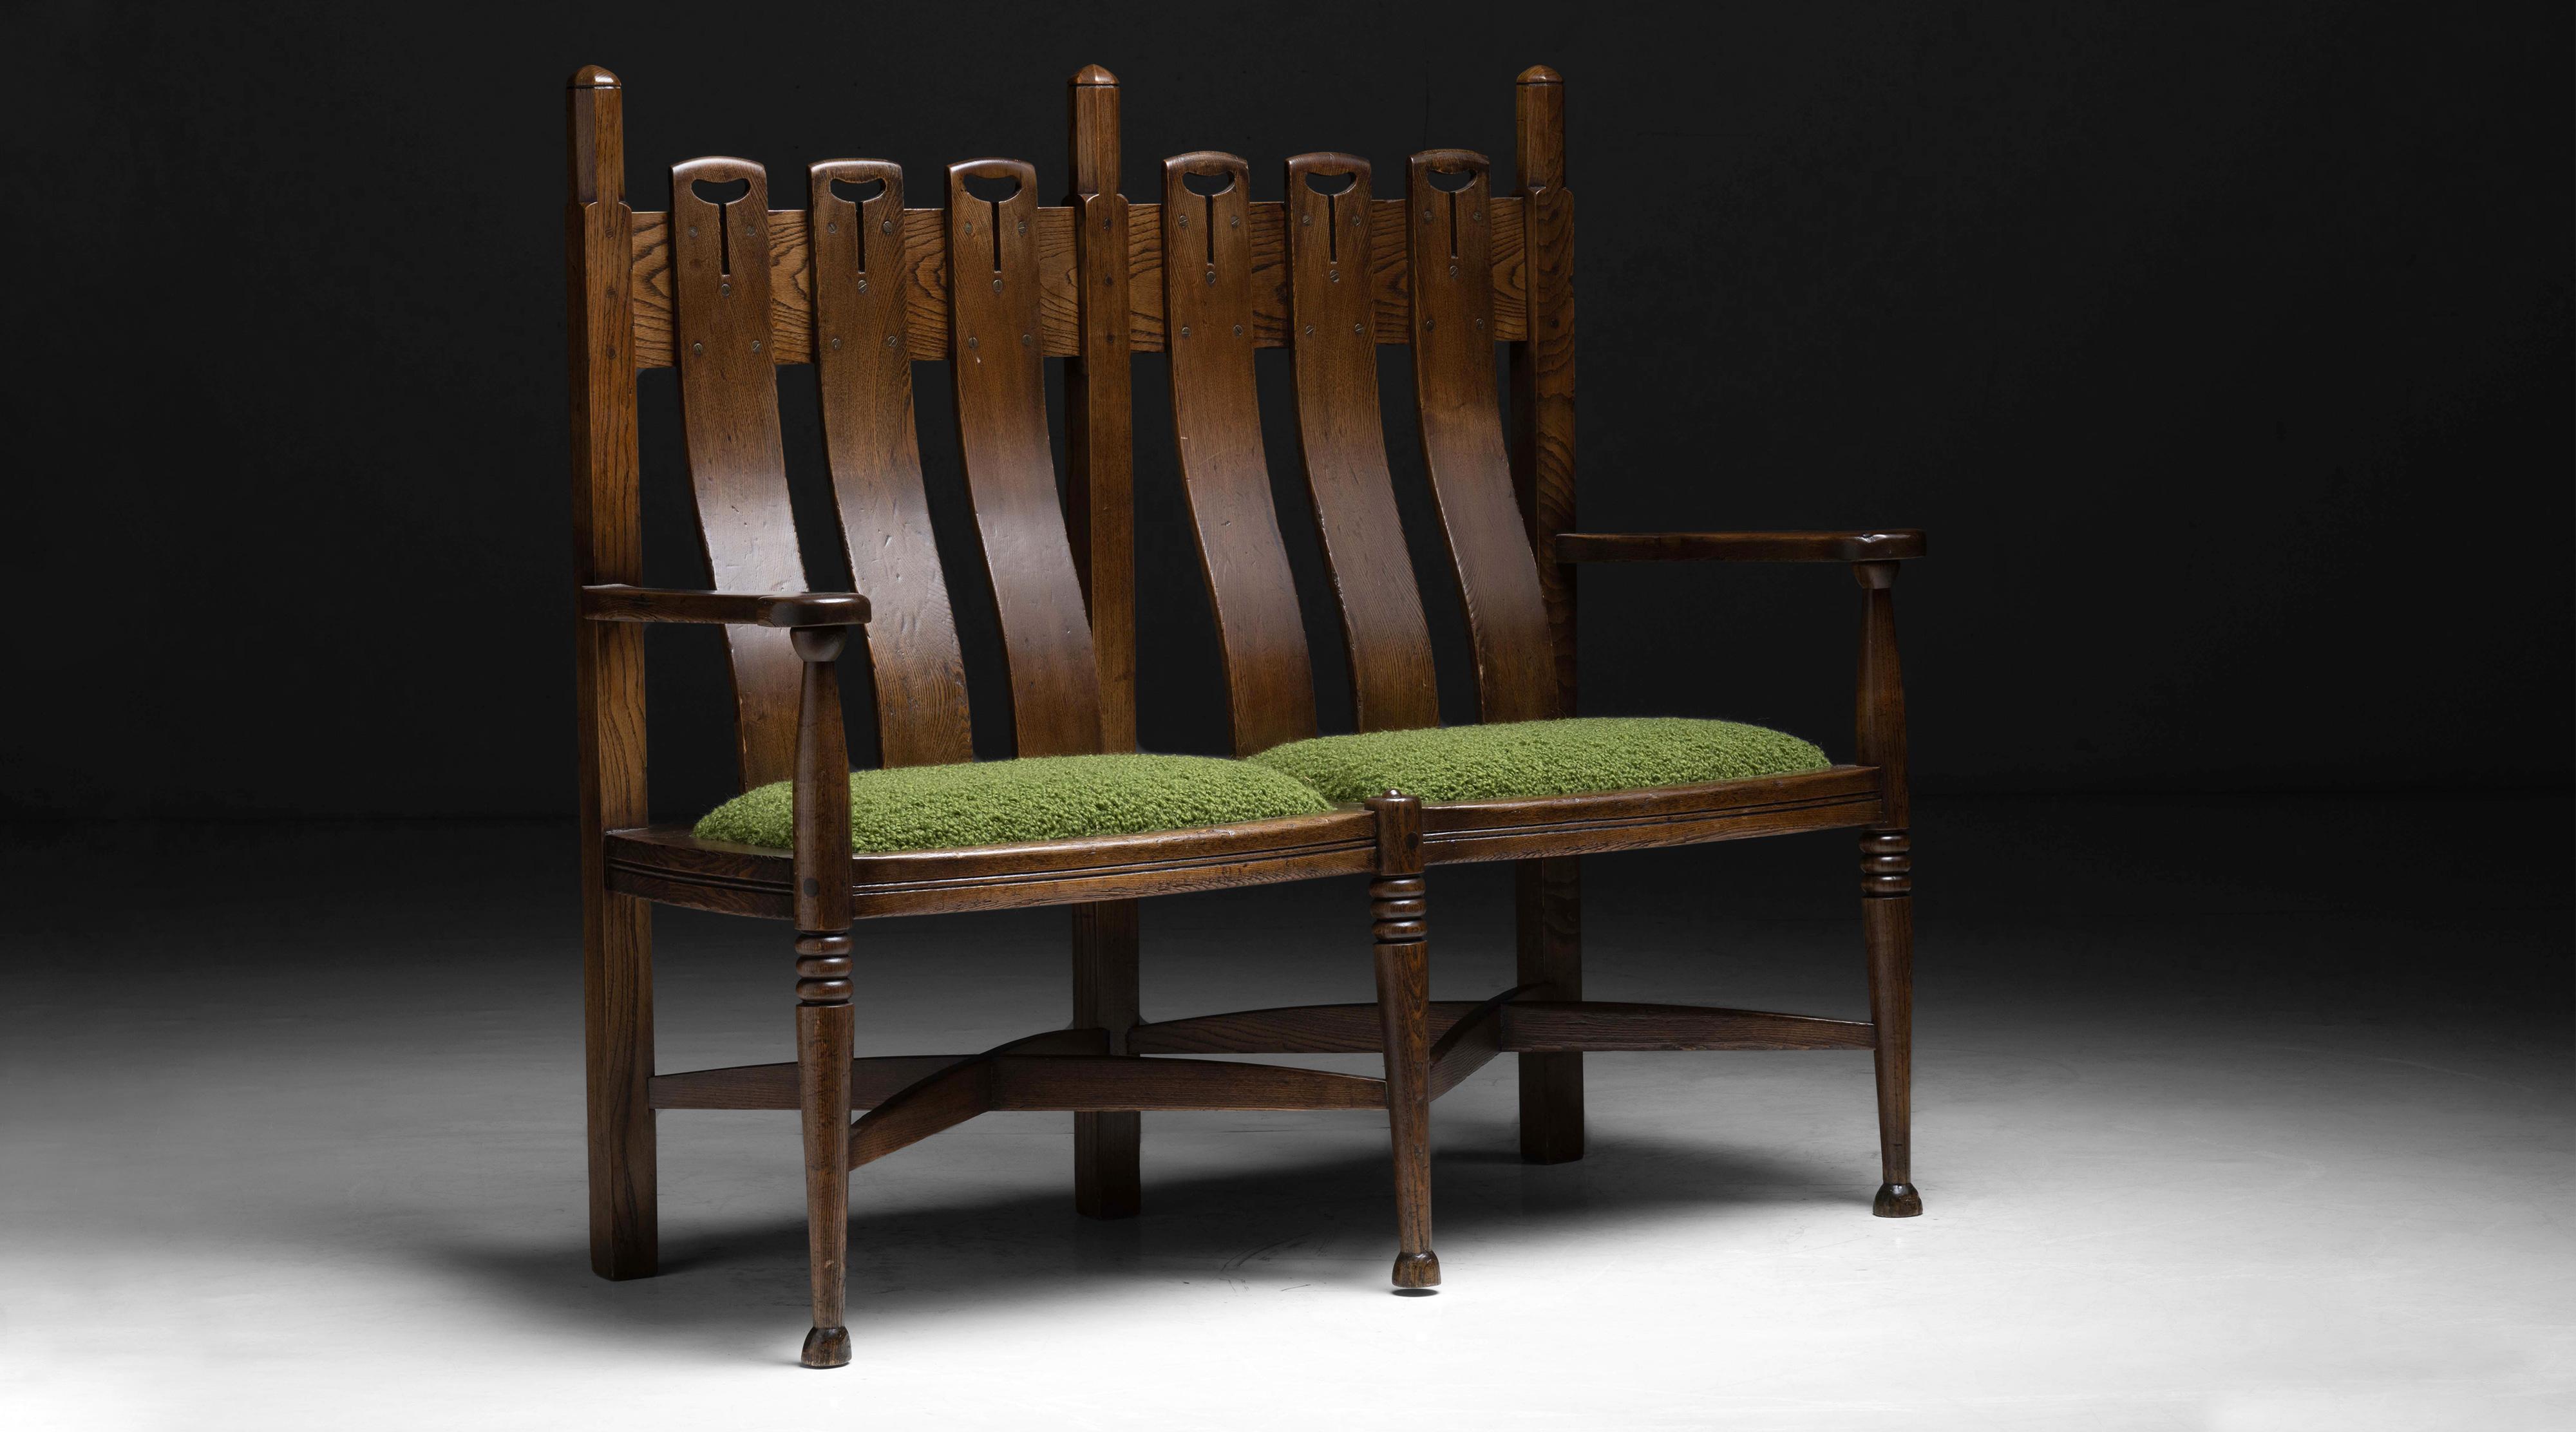 George Walton settle.

England, circa 1880.

Oak settle designed by George Walton, produced by William Birch of High Wycombe and retailed by Liberty of London, incredible original condition with dark finish and cushions newly upholstered in